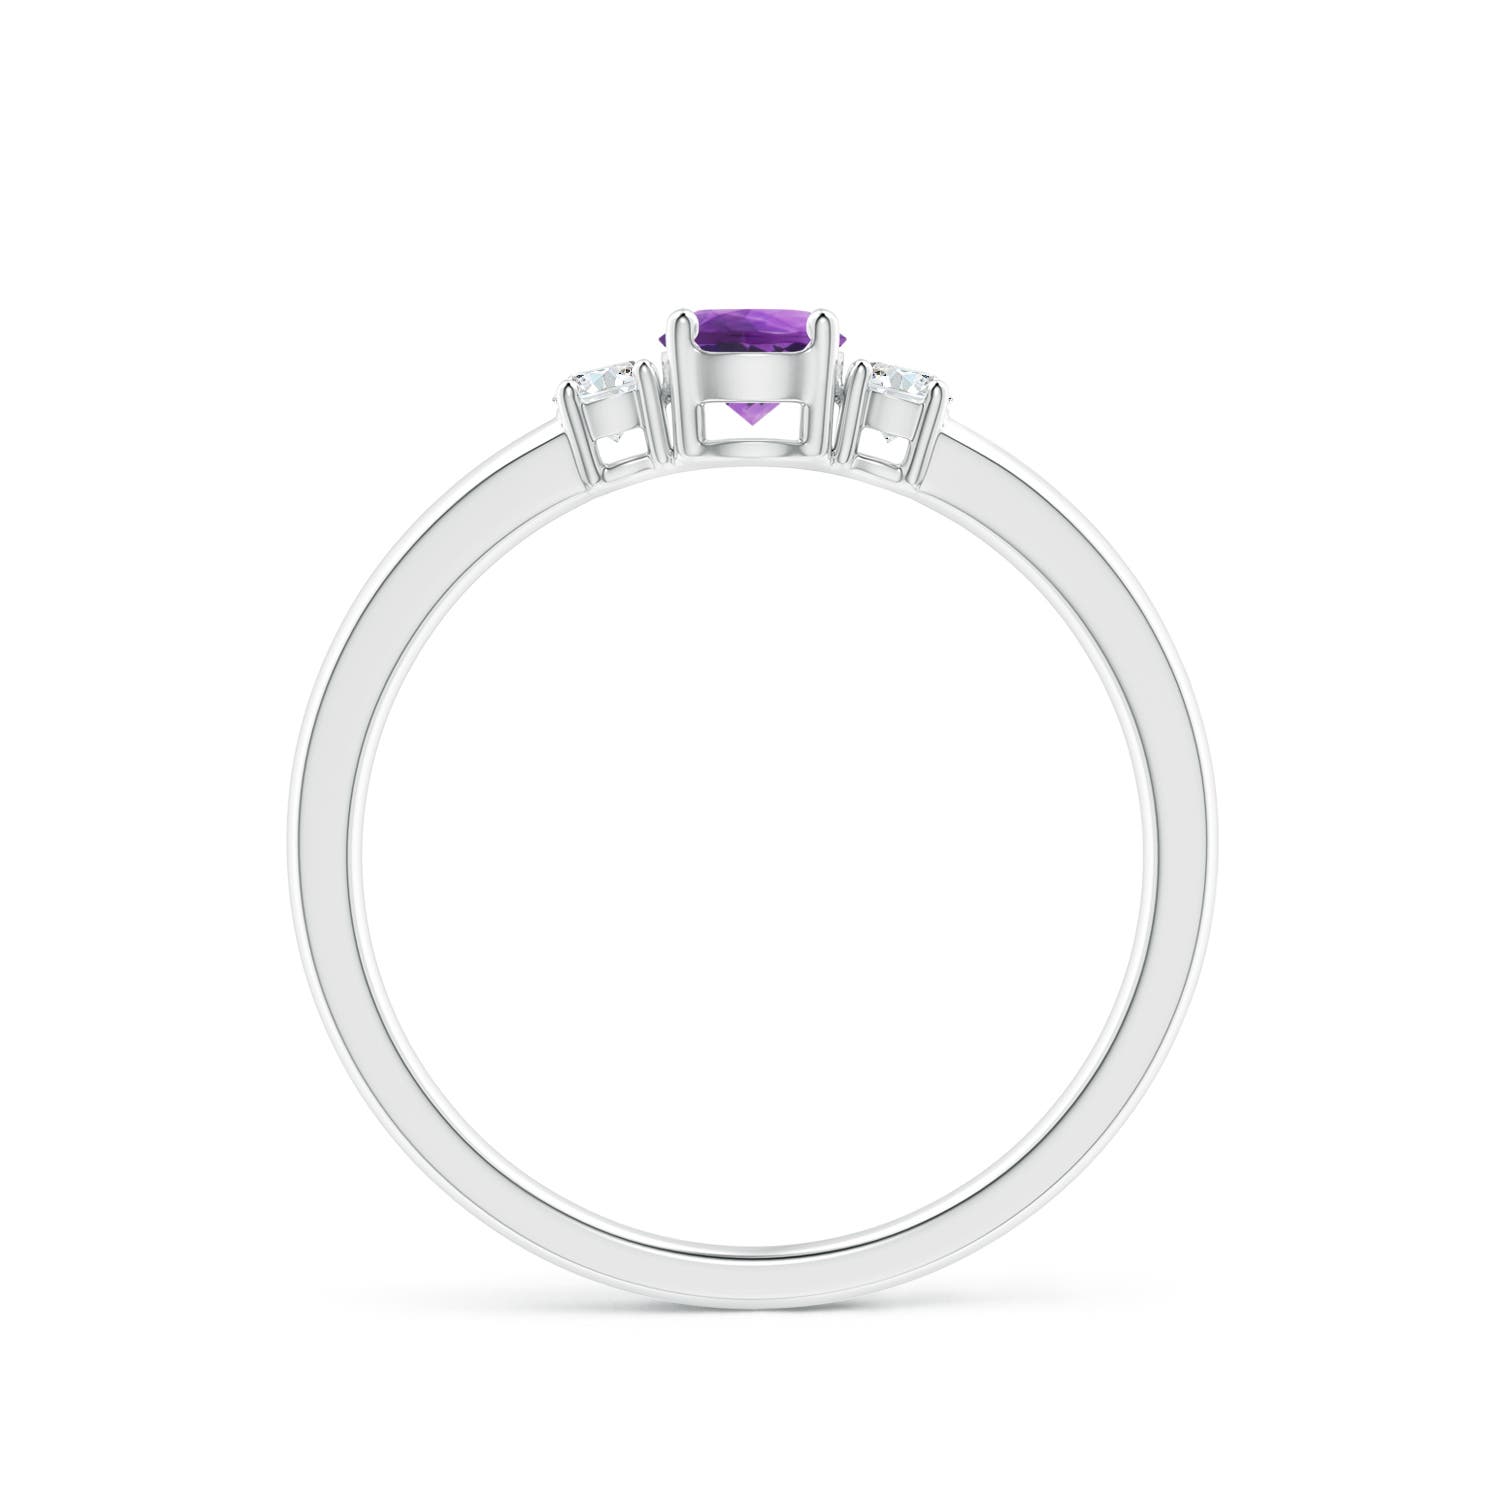 AAA - Amethyst / 0.39 CT / 14 KT White Gold